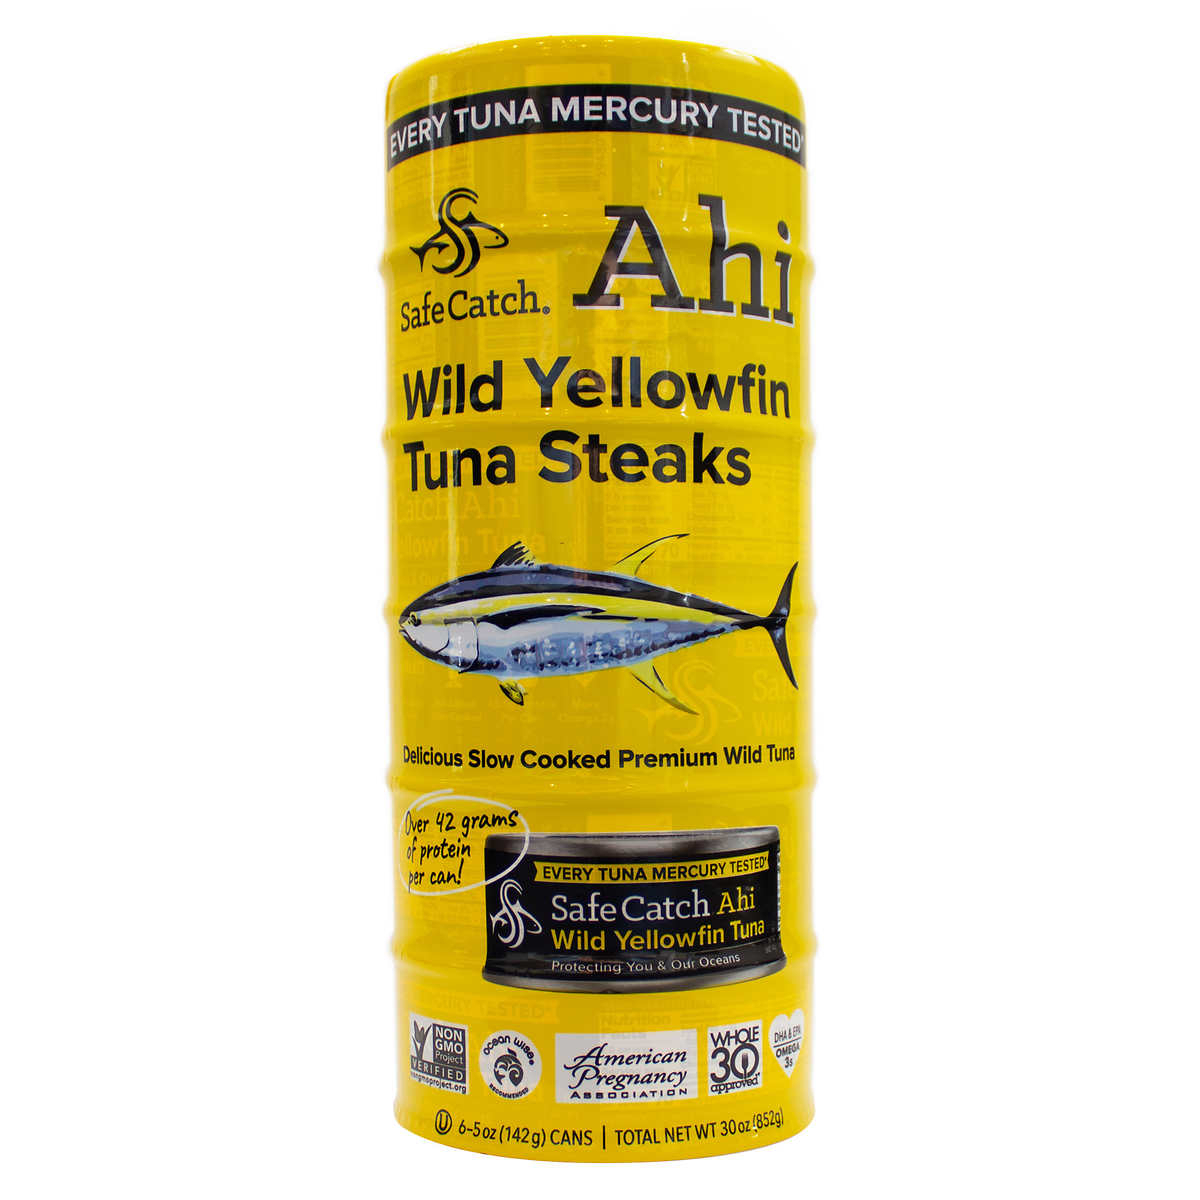 Safe Catch Ahi Wild Yellowfin Tuna Steaks, 6-count, 5 Oz Cans